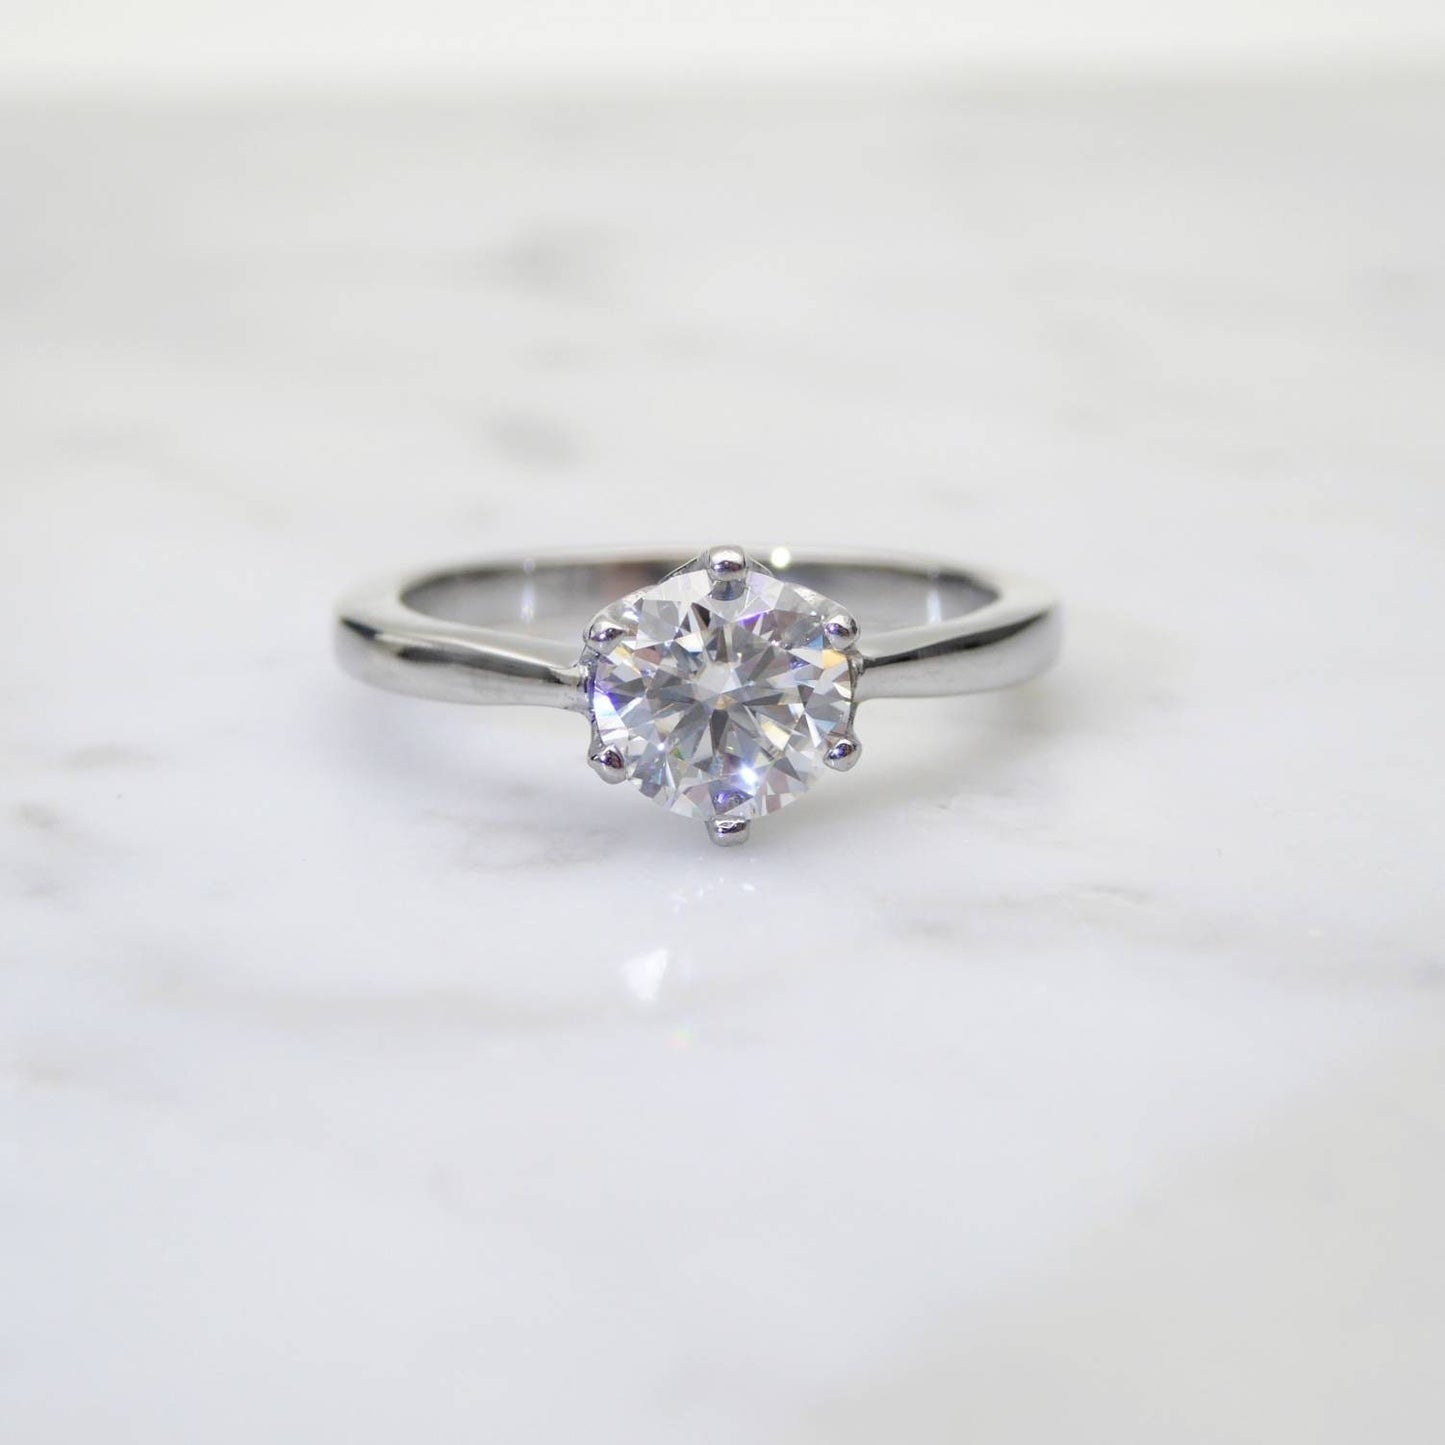 1ct Moissanite Solitaire ring available in white gold or titanium - engagement ring - hand made